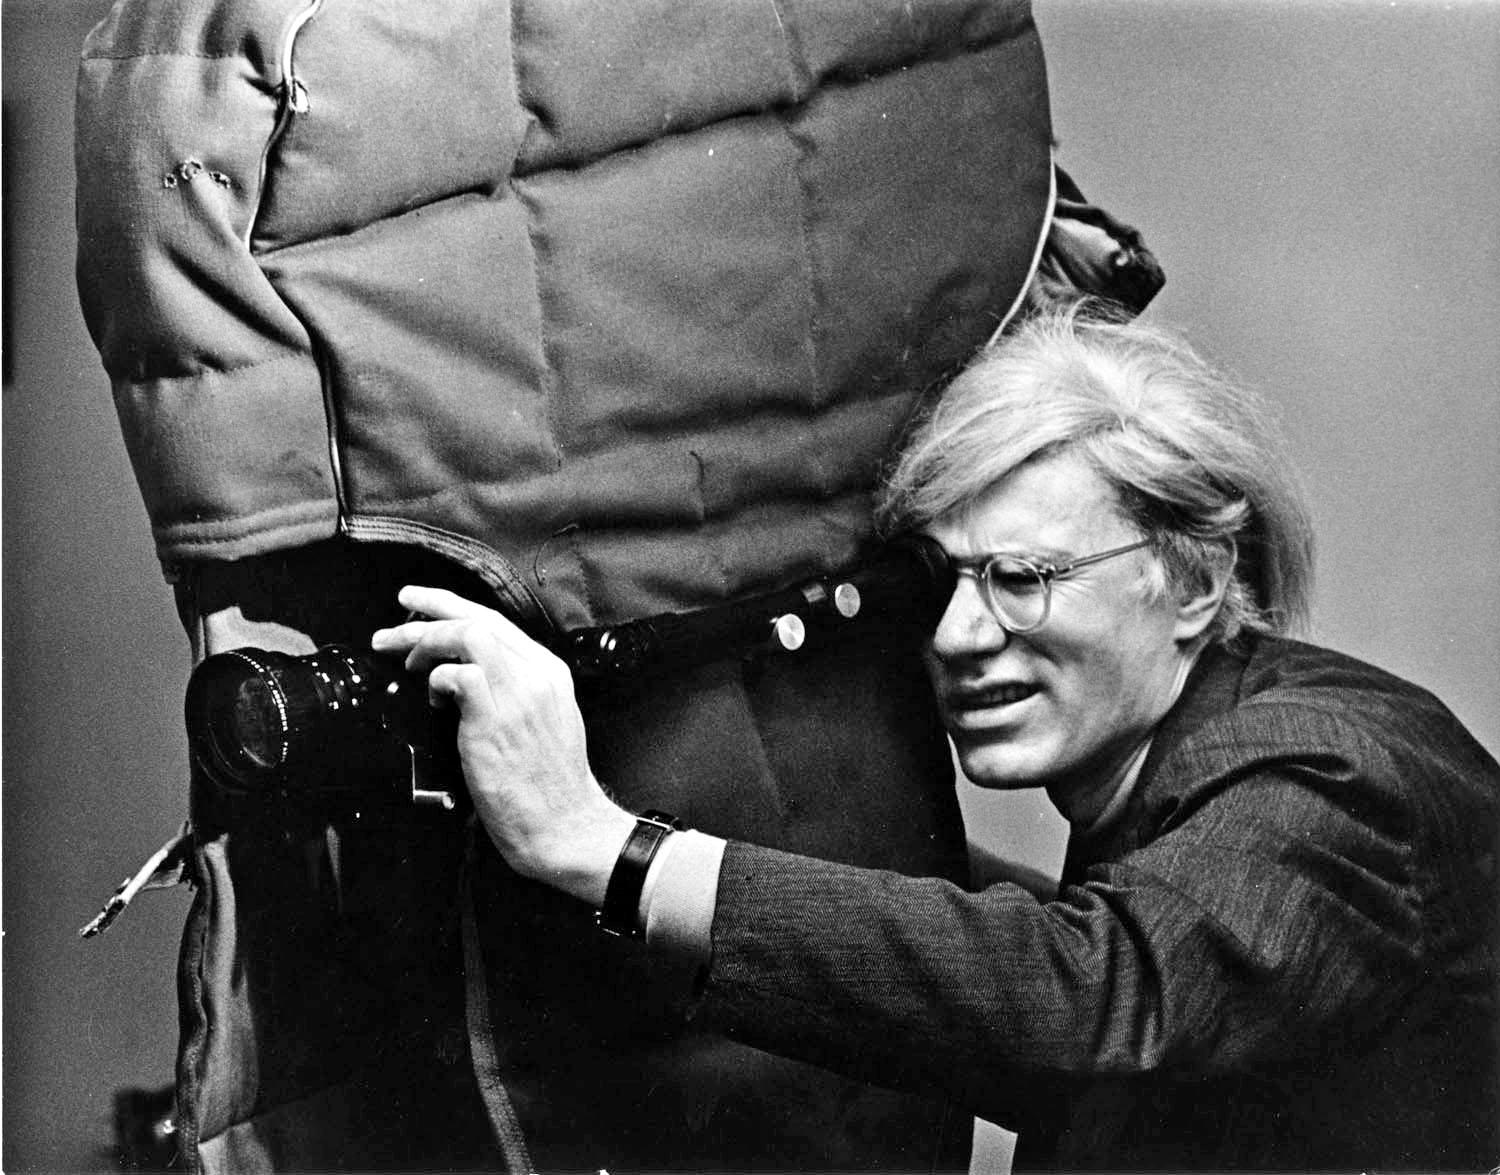 Jack Mitchell Black and White Photograph -  Artist Andy Warhol filming "Women in Revolt"